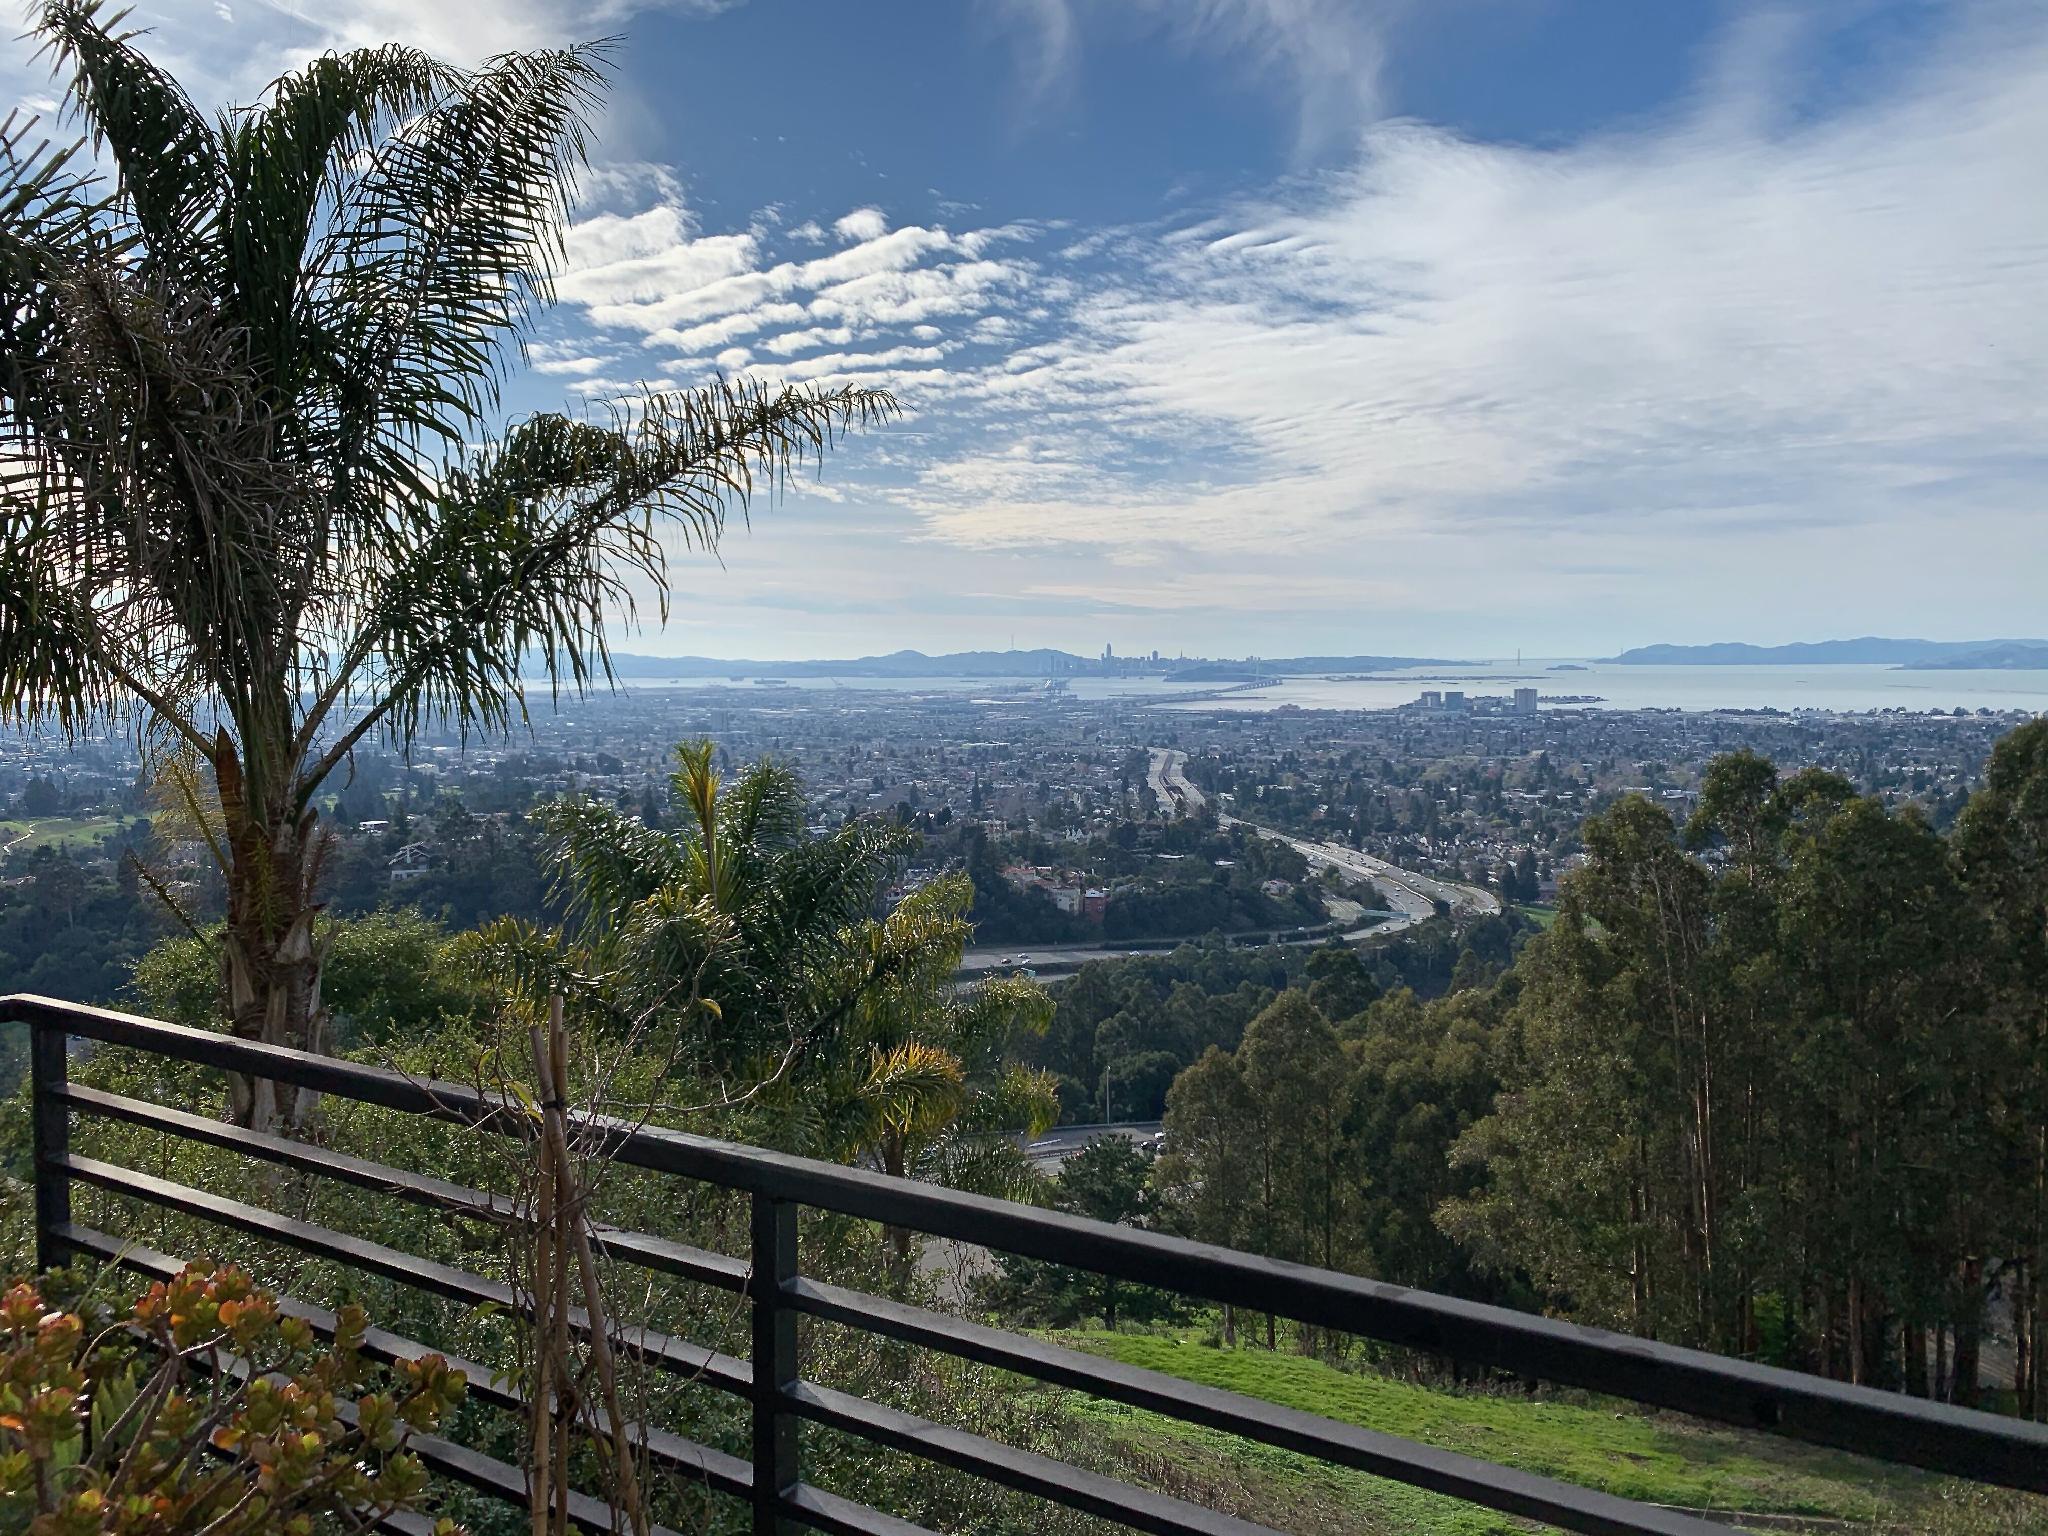 Property Image 2 - Claremont Hills 3 bedroom home with stunning views overlooking San Francisco Bay